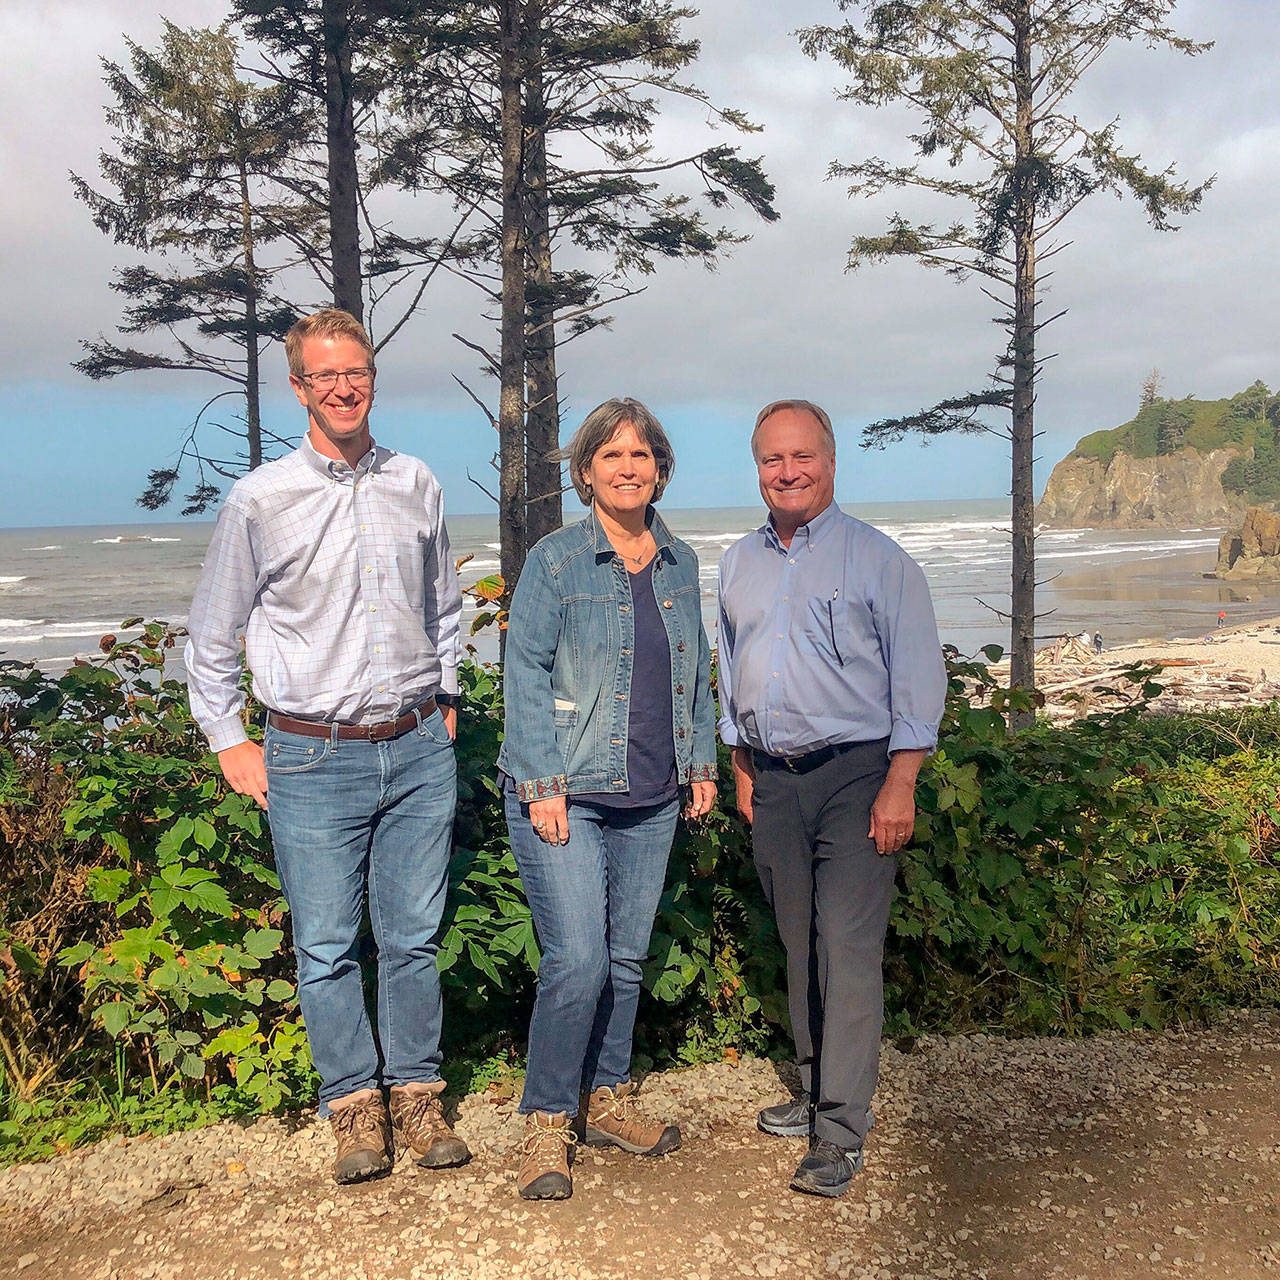 U.S. Rep. Derek Kilmer, D-Gig Harbor, left, is seen with House Appropriations Subcommittee on the Interior and Environment Chairwoman Rep. Betty McCollum, D-Minn., and ranking member Rep. Dave Joyce, R-Ohio, at the Ruby Beach trailhead in west Jefferson County.